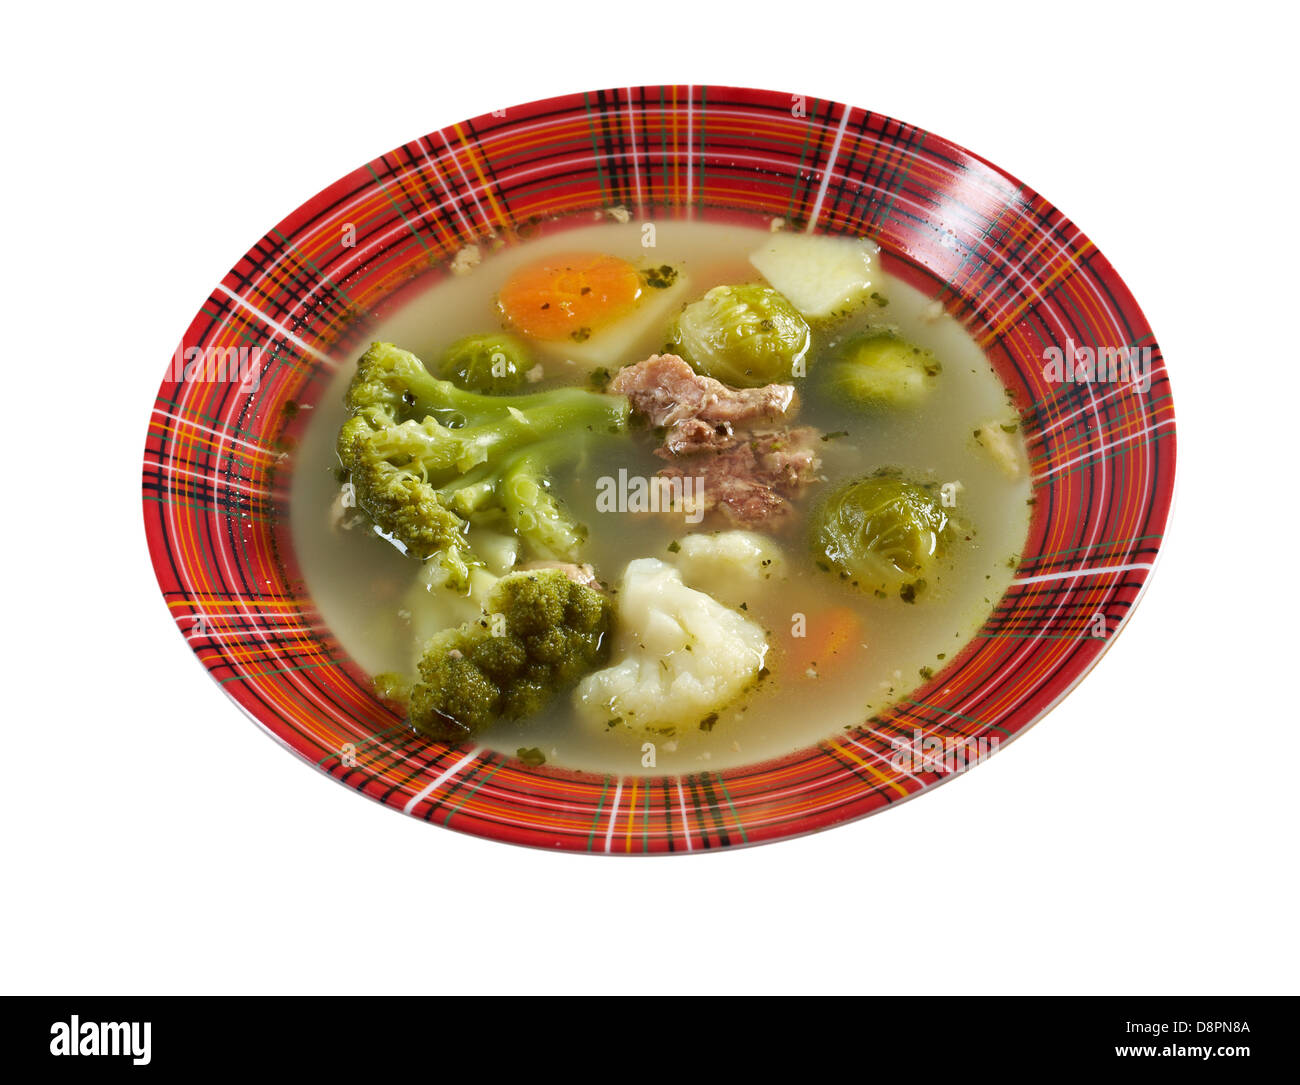 italian farm-style country vegetables soup with broccoli  Stock Photo